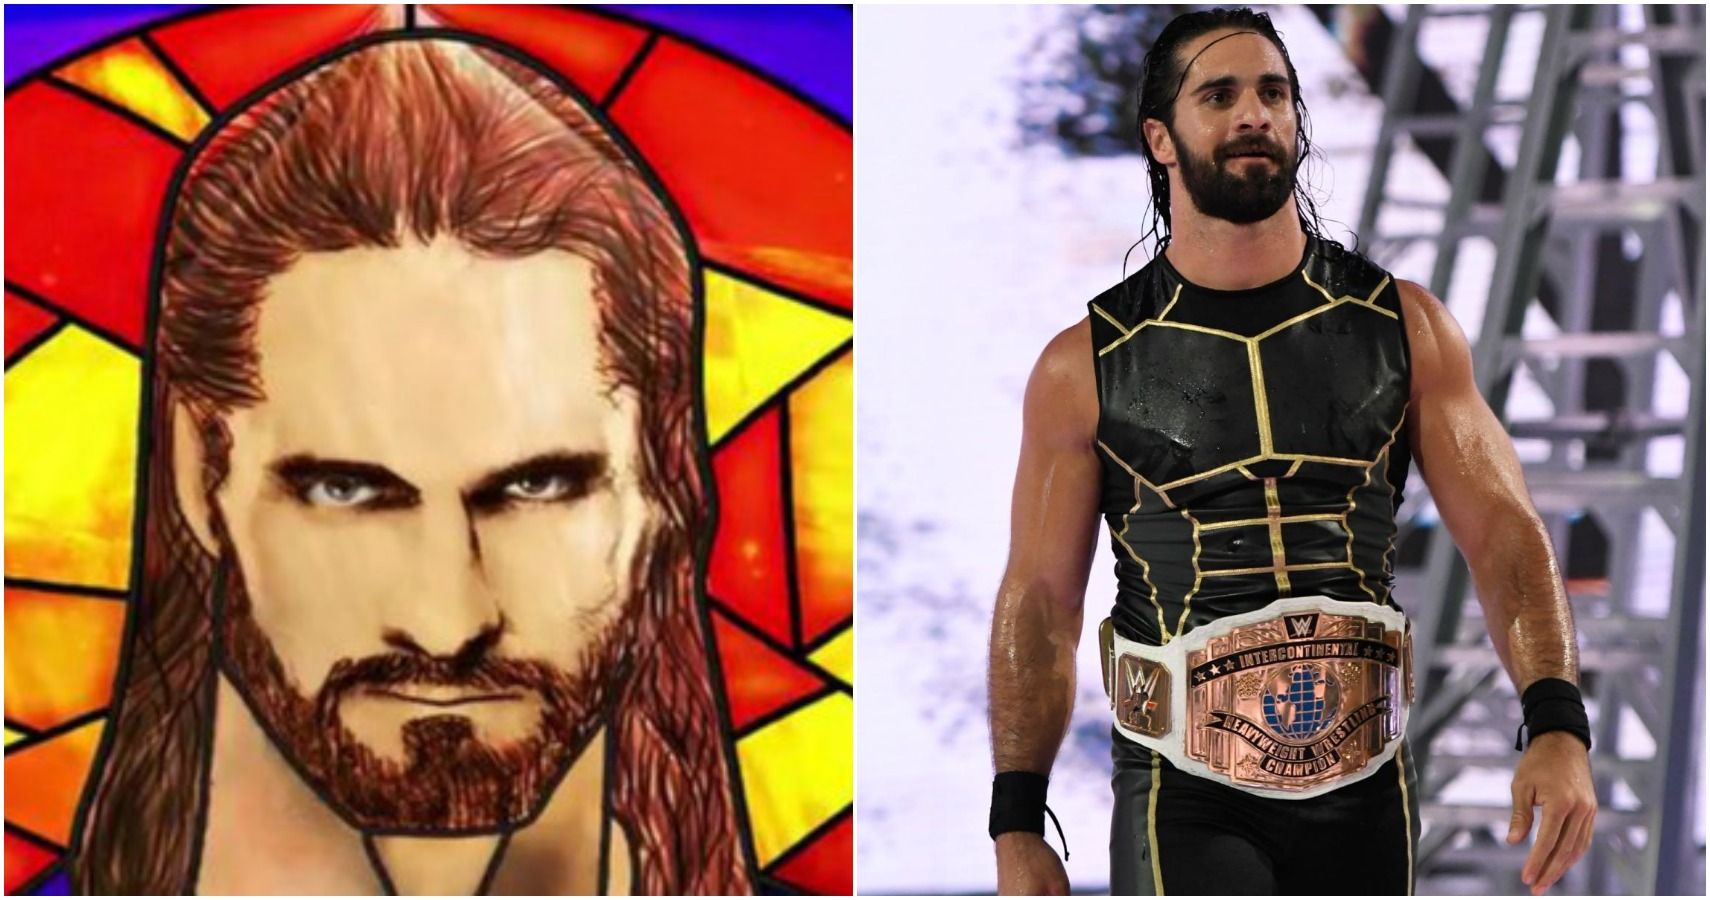 WWE: Rey Mysterio VS Seth Rollins' 'Eye For An Eye' Ending Had To Do With  Former's Contract Signing?